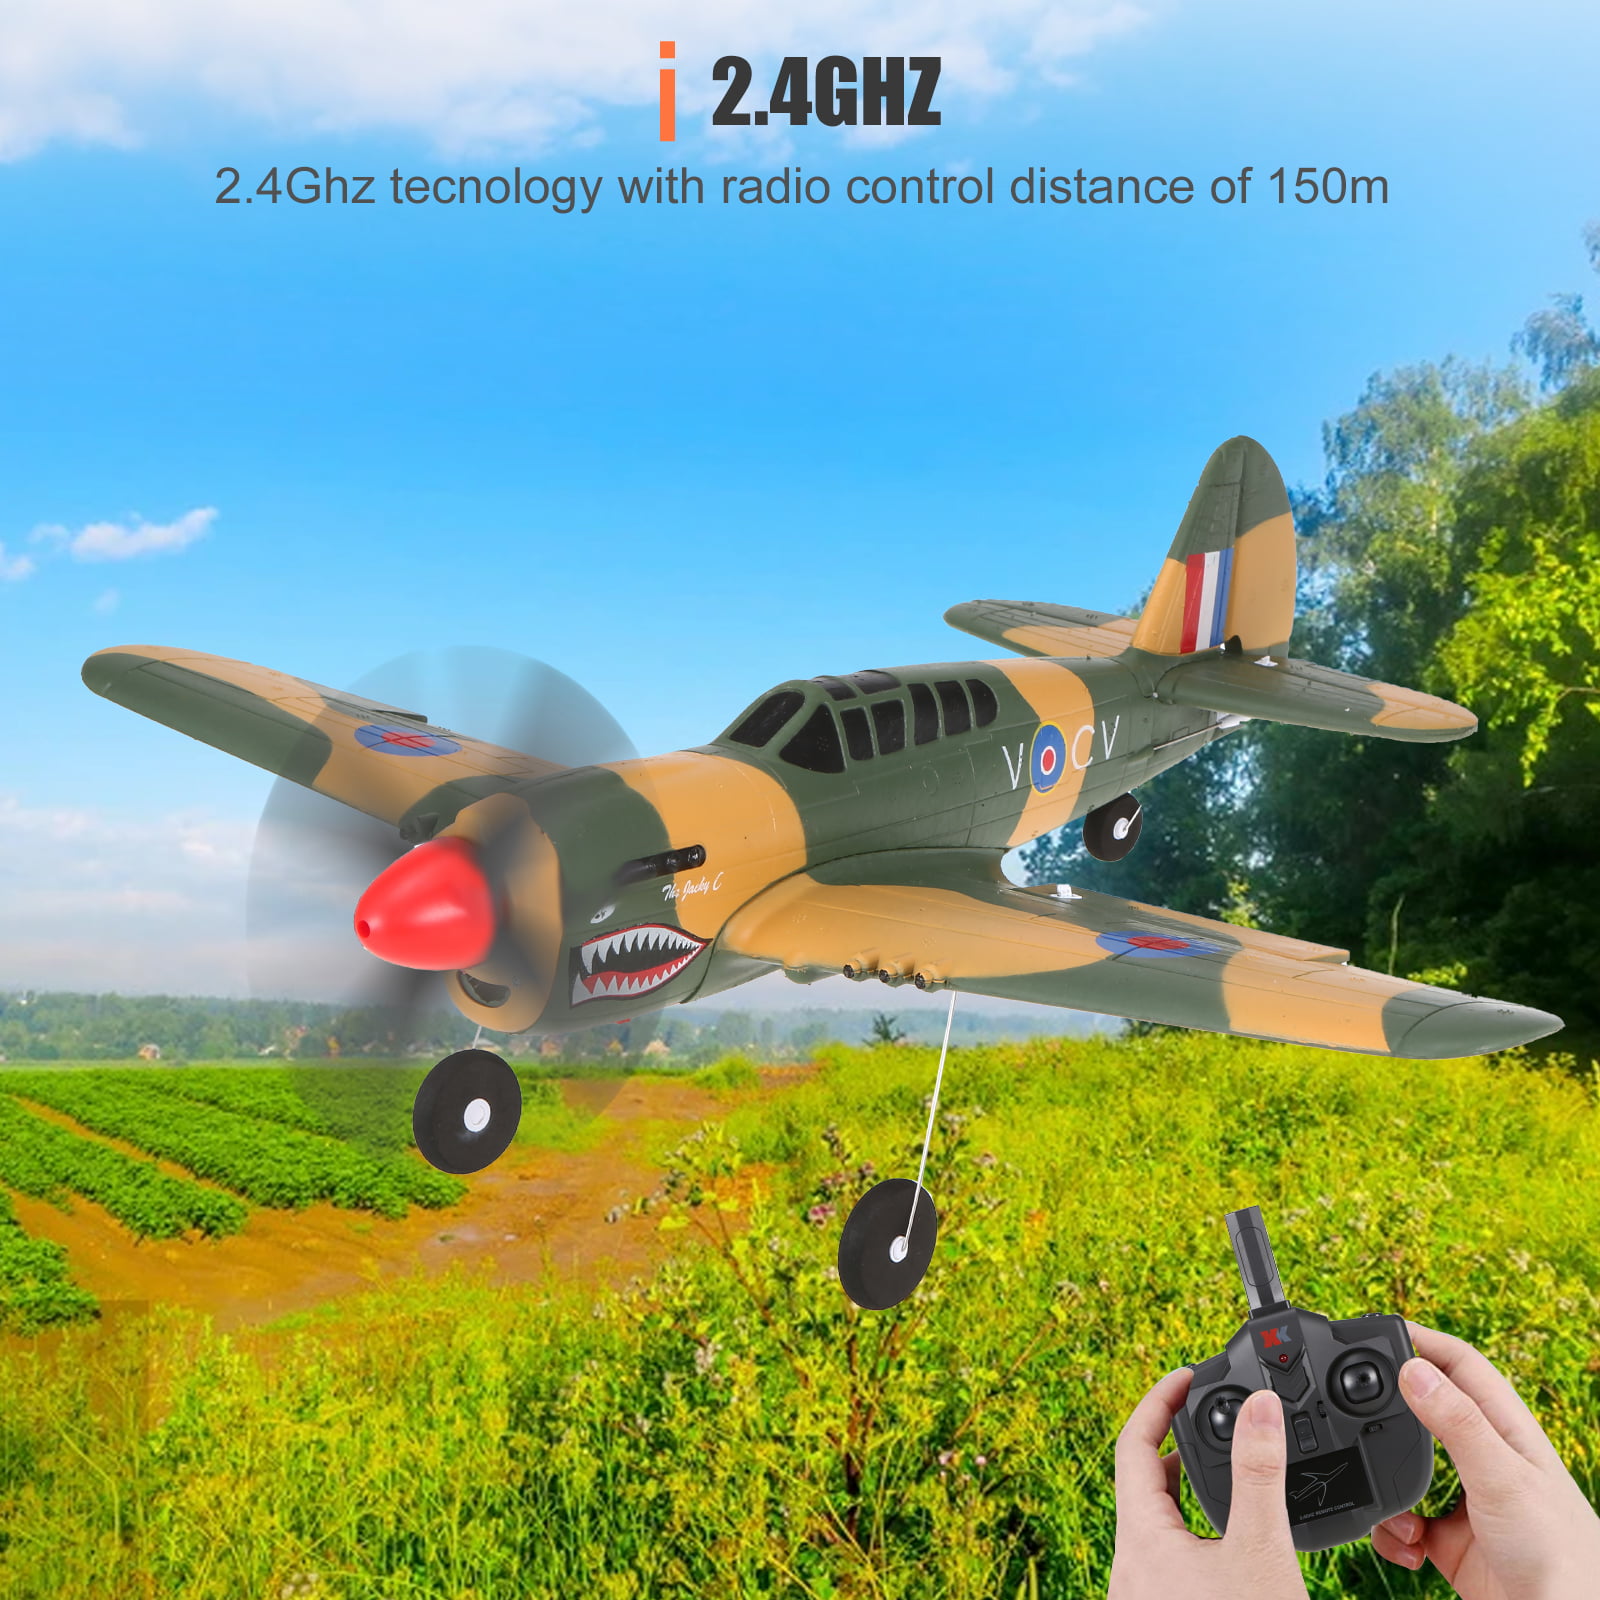 SparY RC Glider Airplane 2.4GHz Radio Control Aircraft with Built Gyro 823 2CH F16 ​​Thunderbirds Remote Control EPP Airplane for Beginners Ready to Fly Range Range Meters